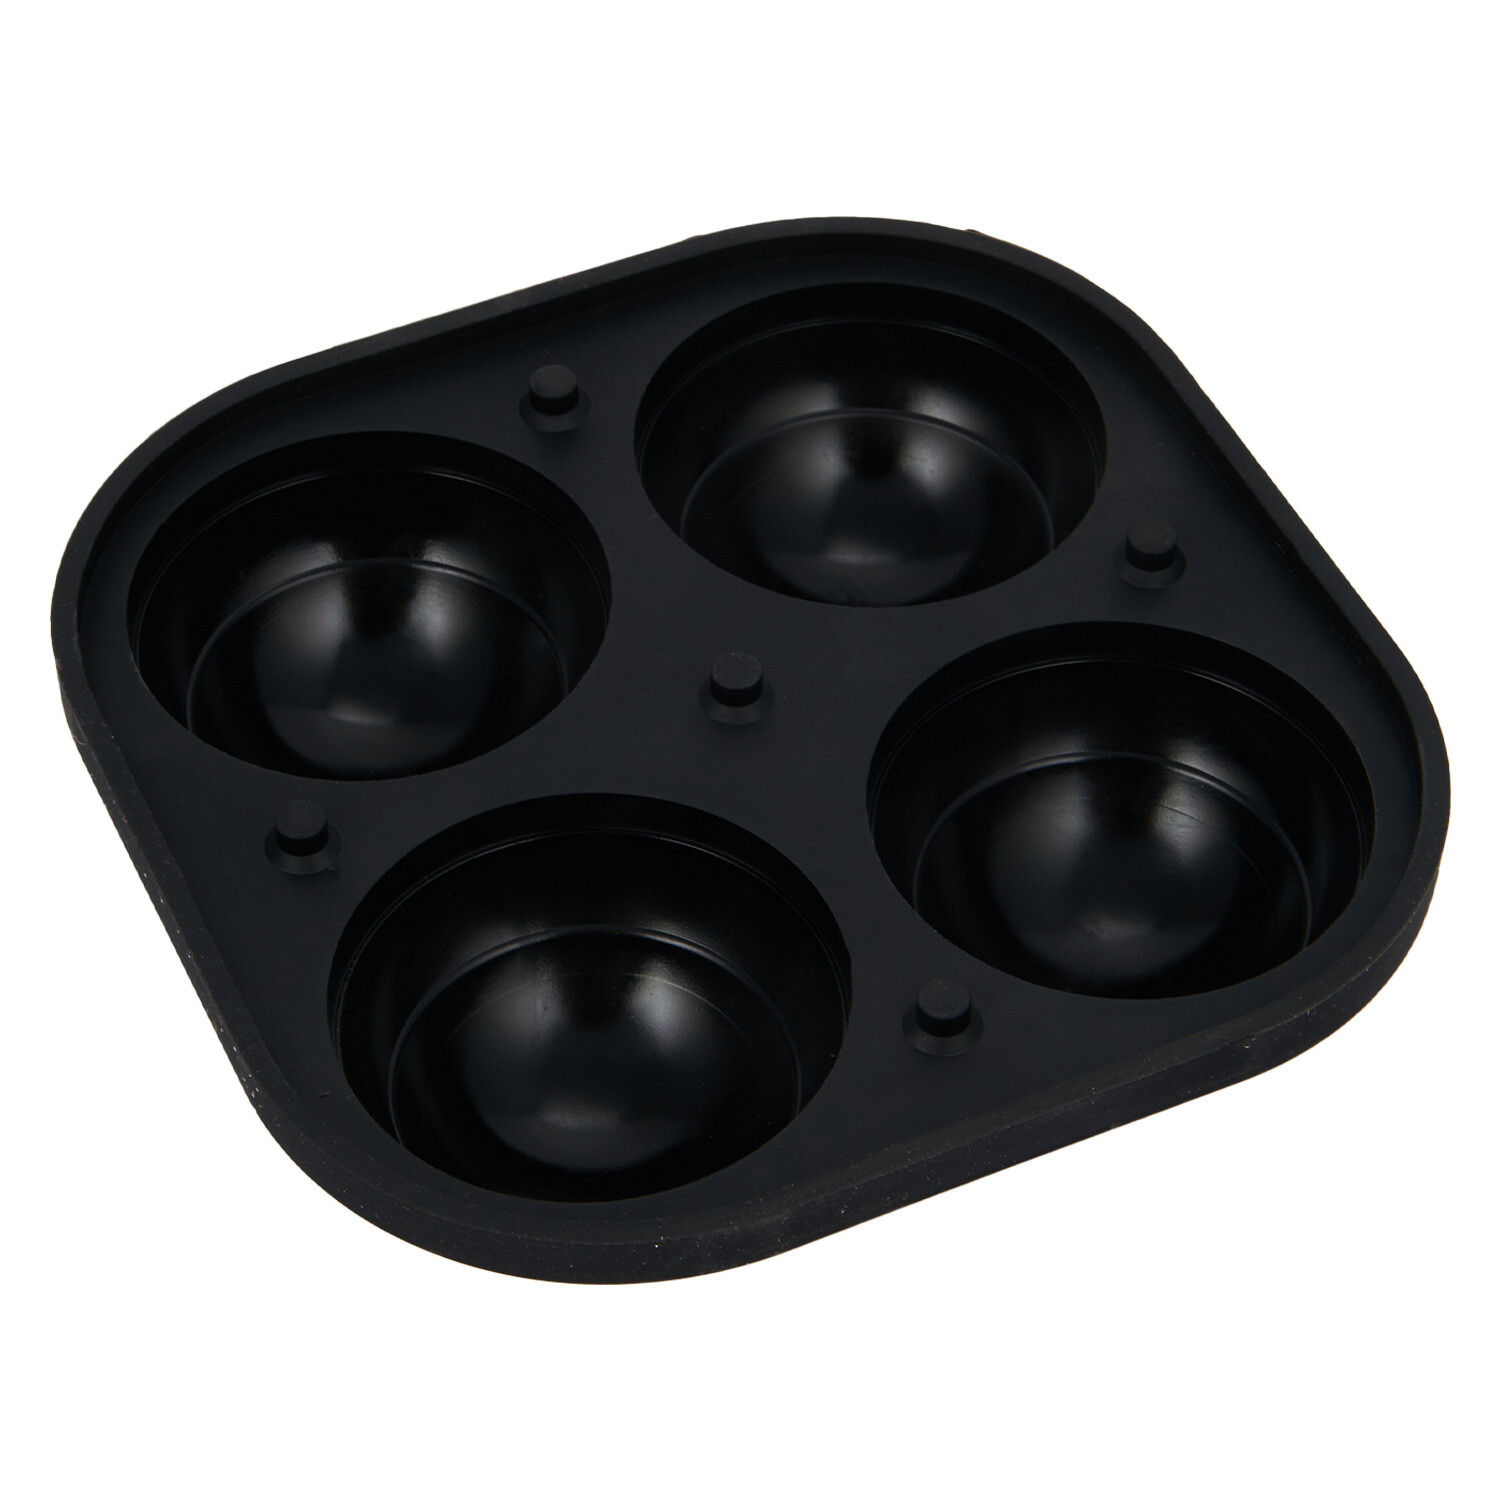 4-Ball Silicone Ice Mould - Black Image 5